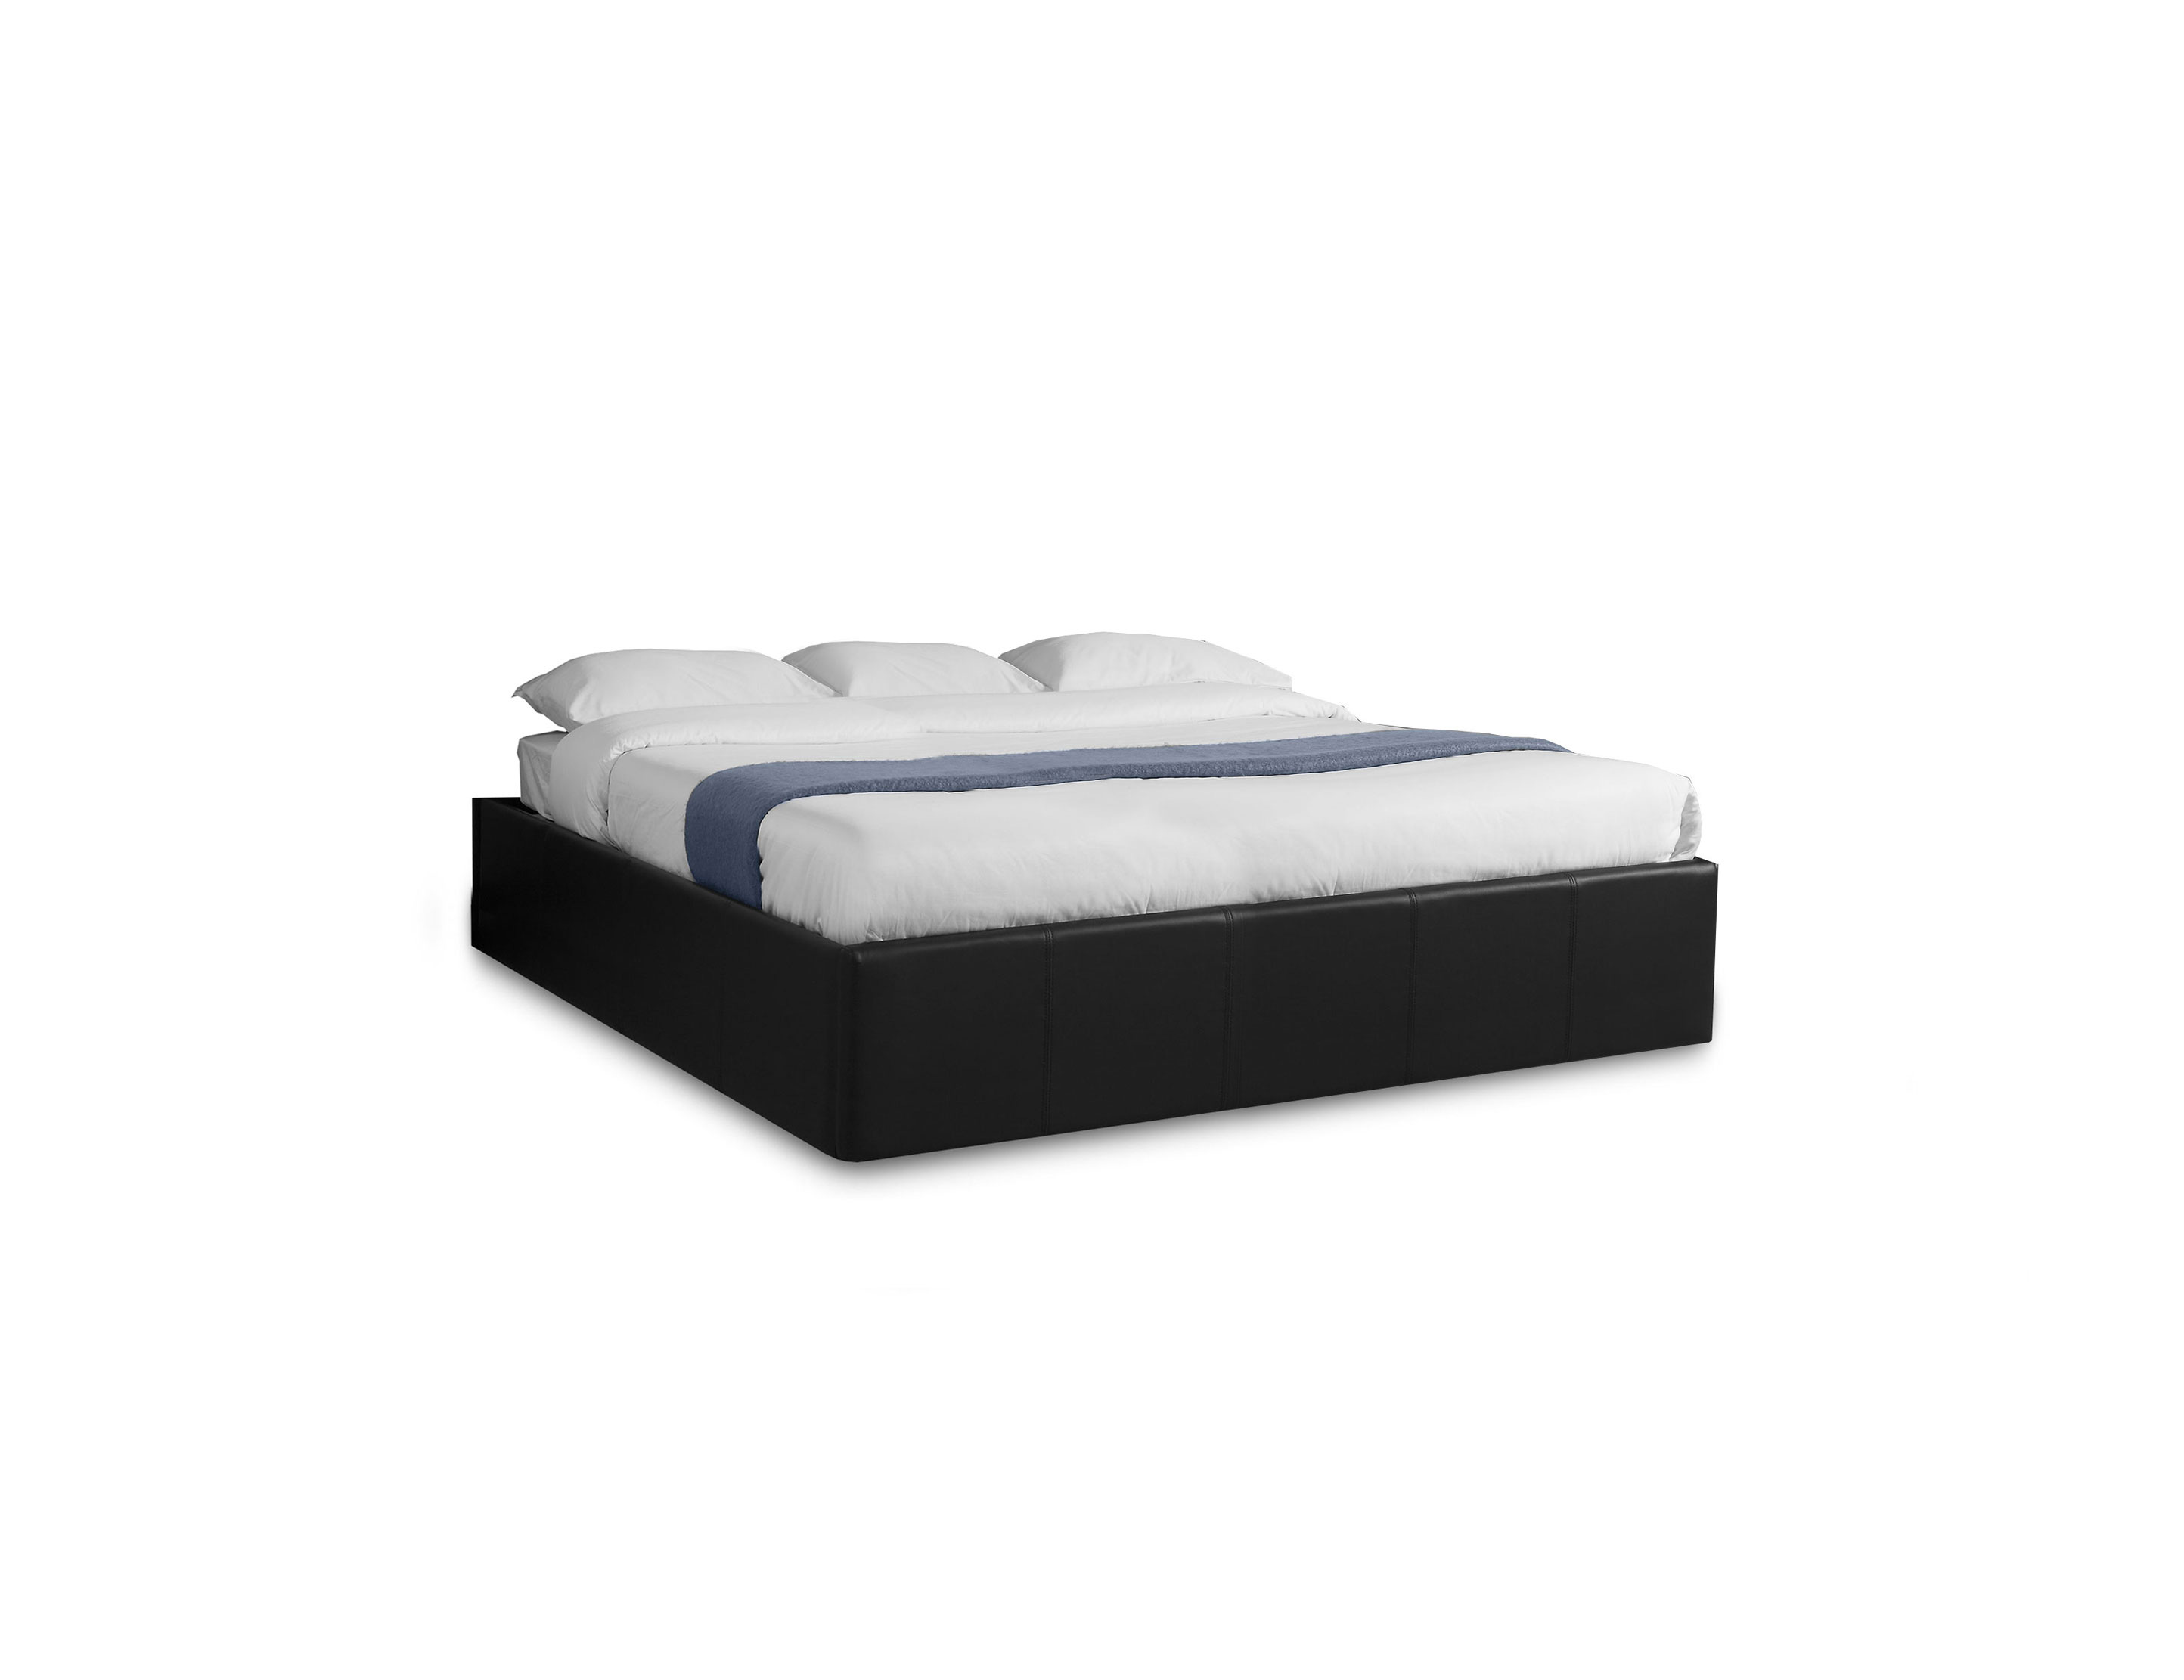 Reveal King Side Lifting Storage Bed, Lift King Bed